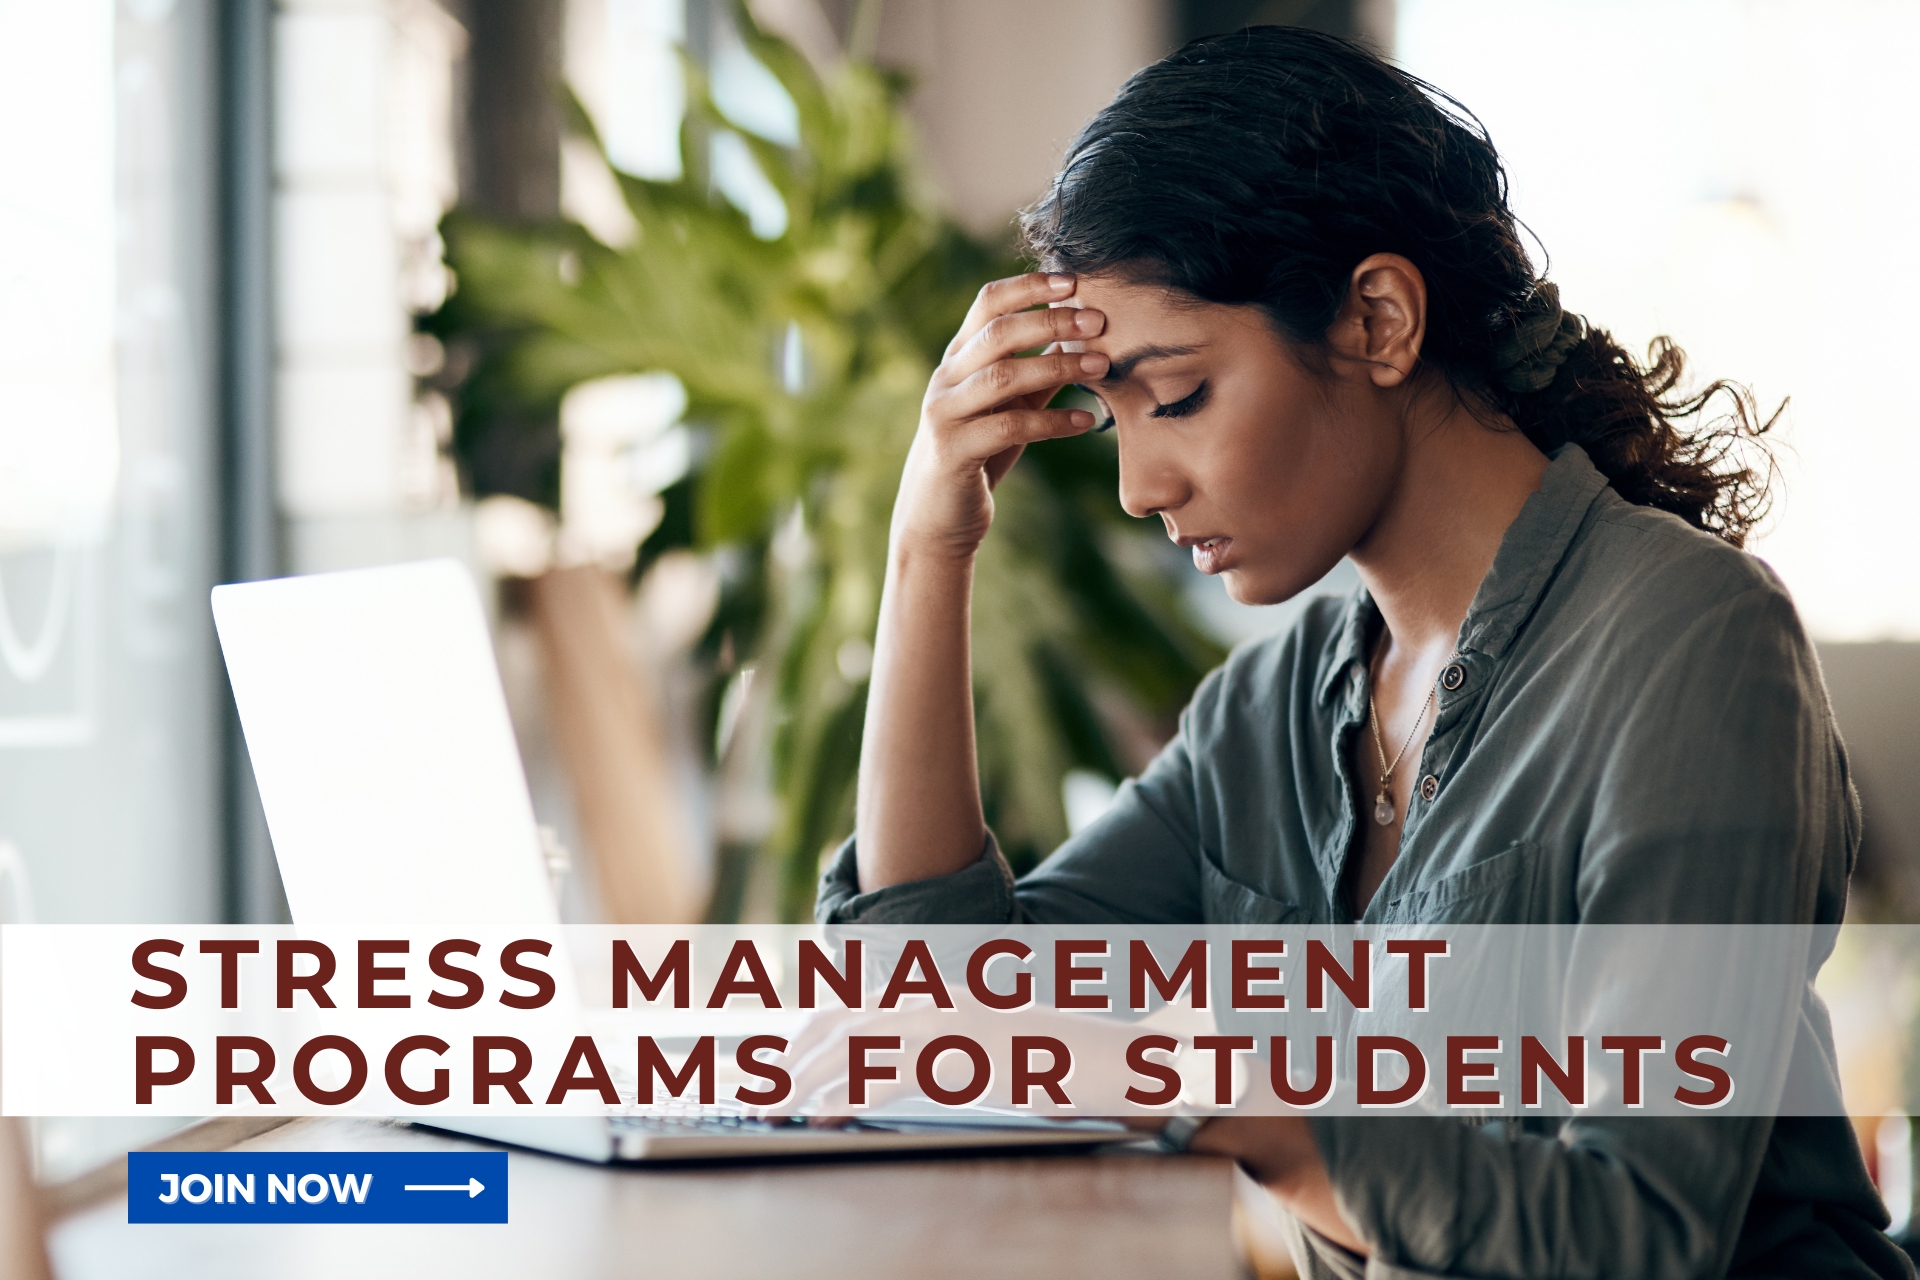 Stress management programs for students